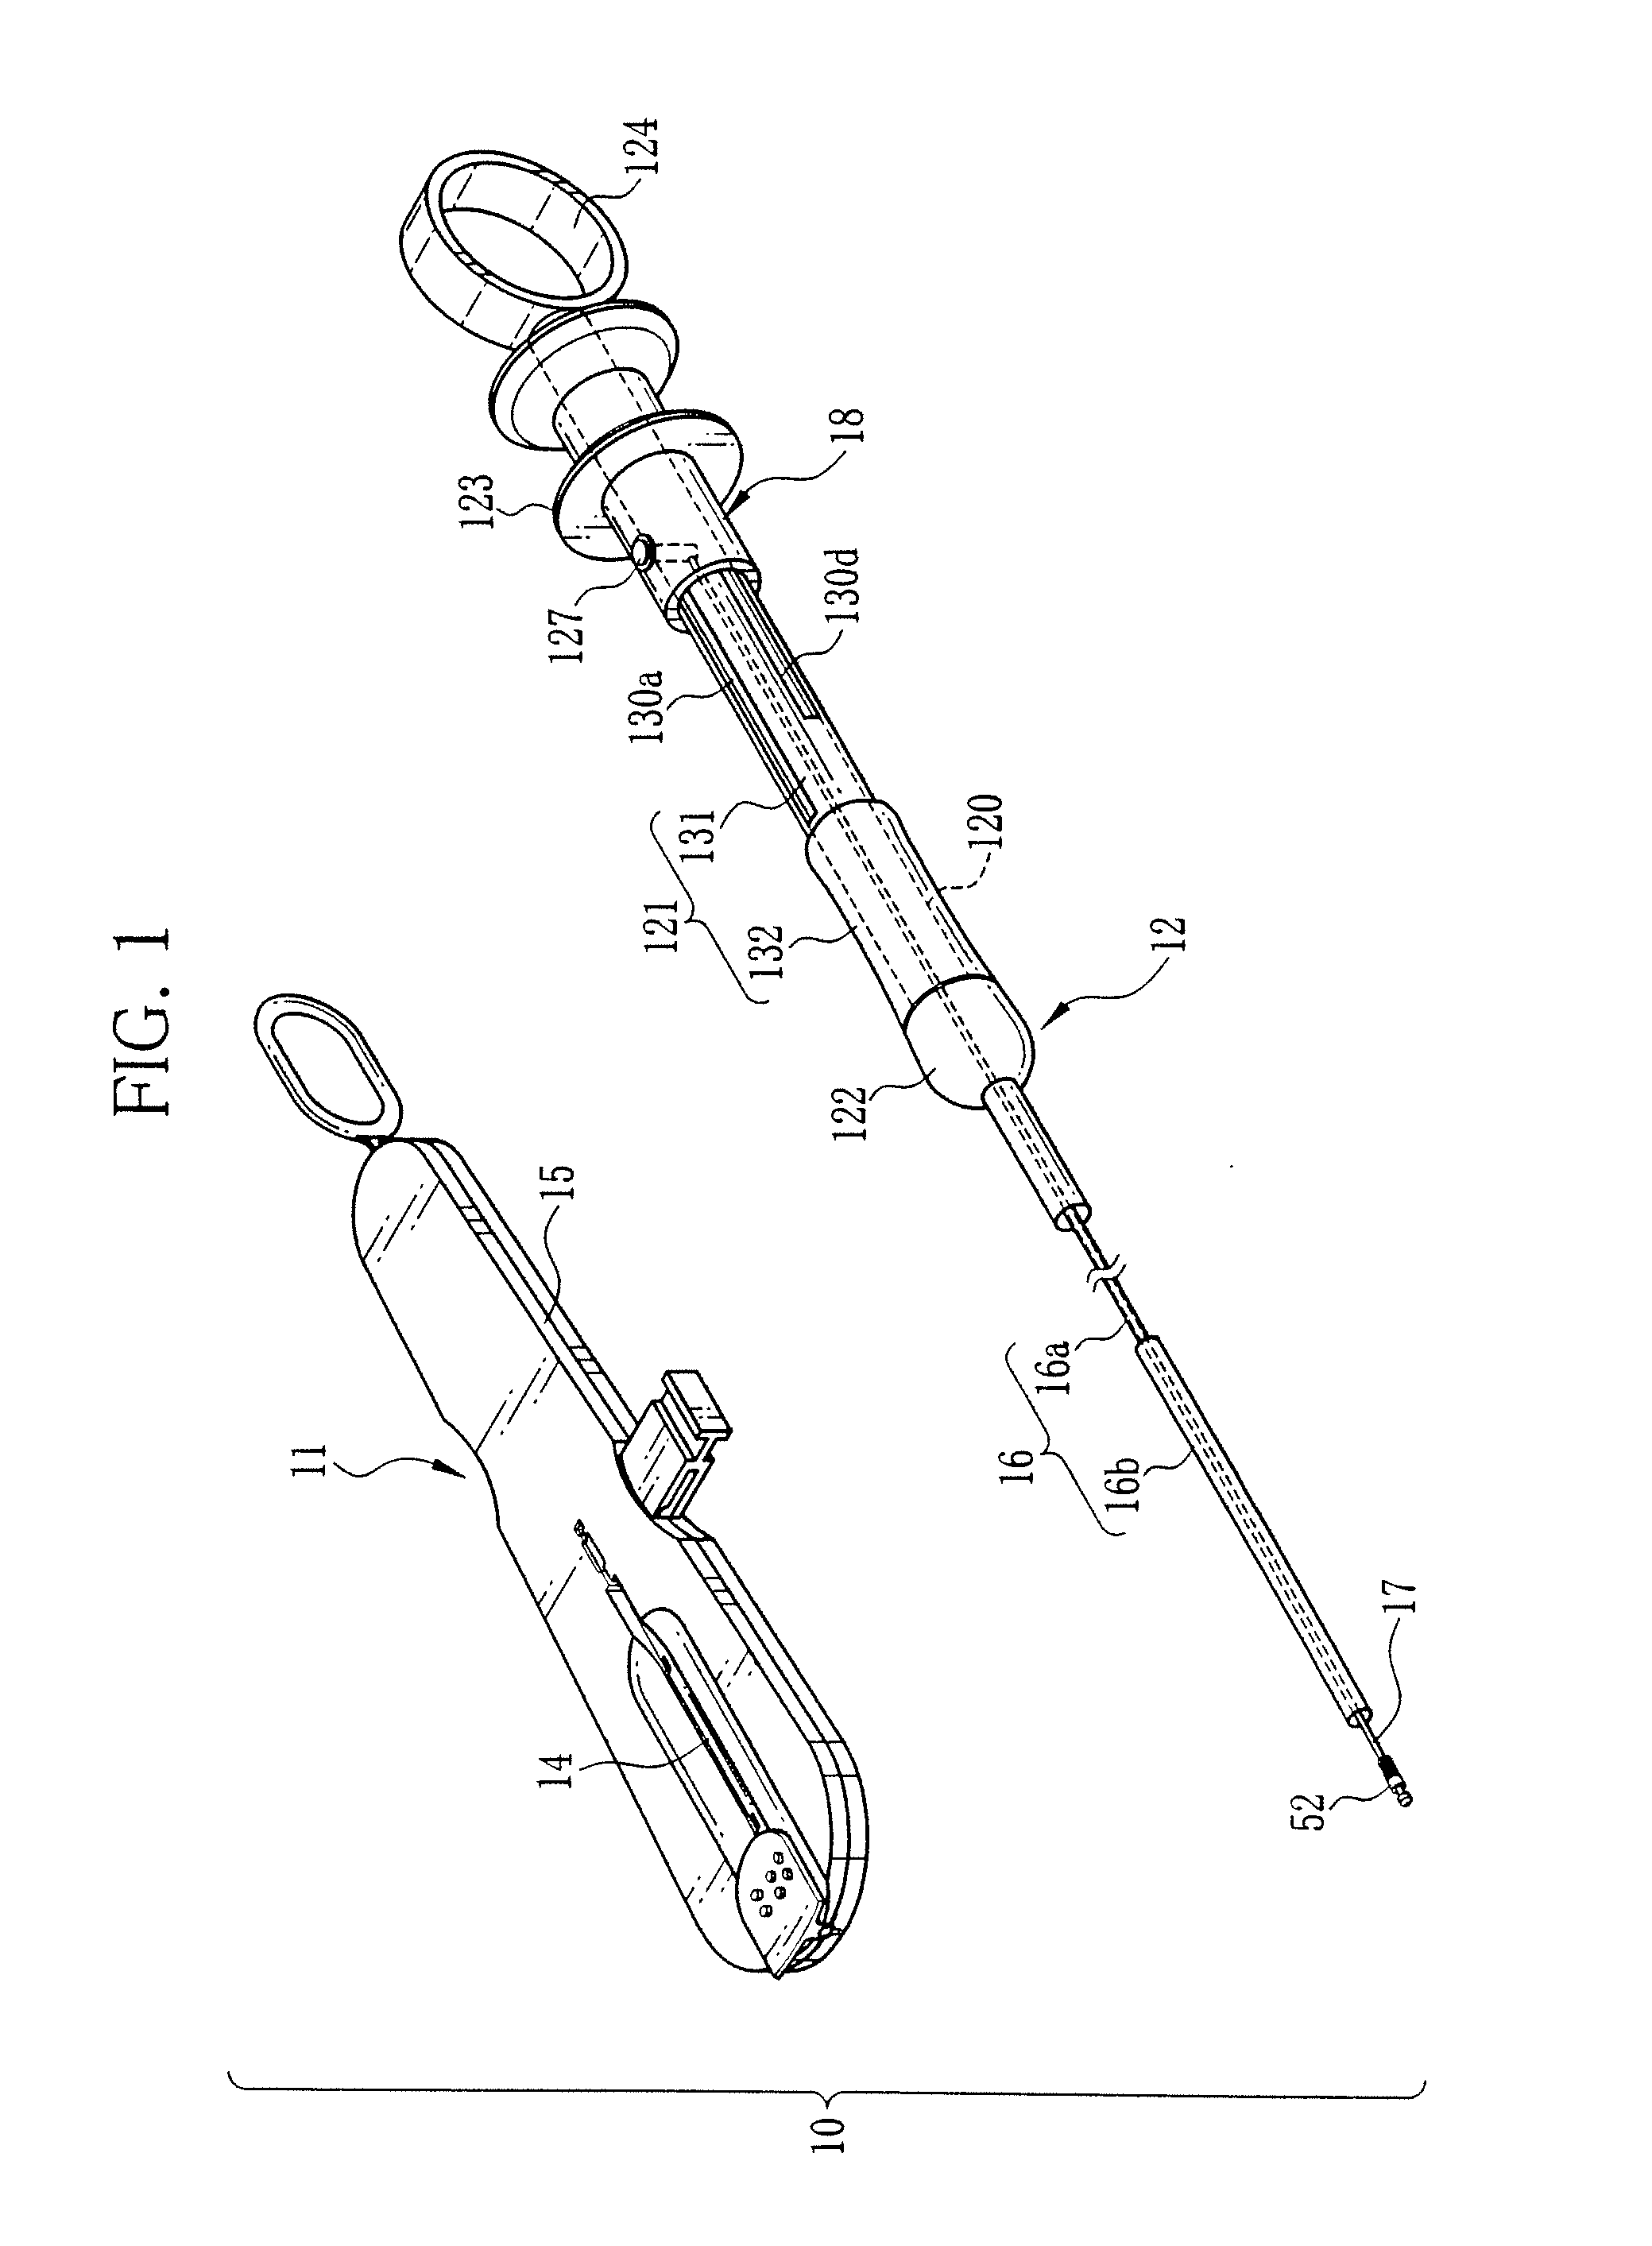 Clip package, multiple clip applicator system, and prevention device for preventing mismatch